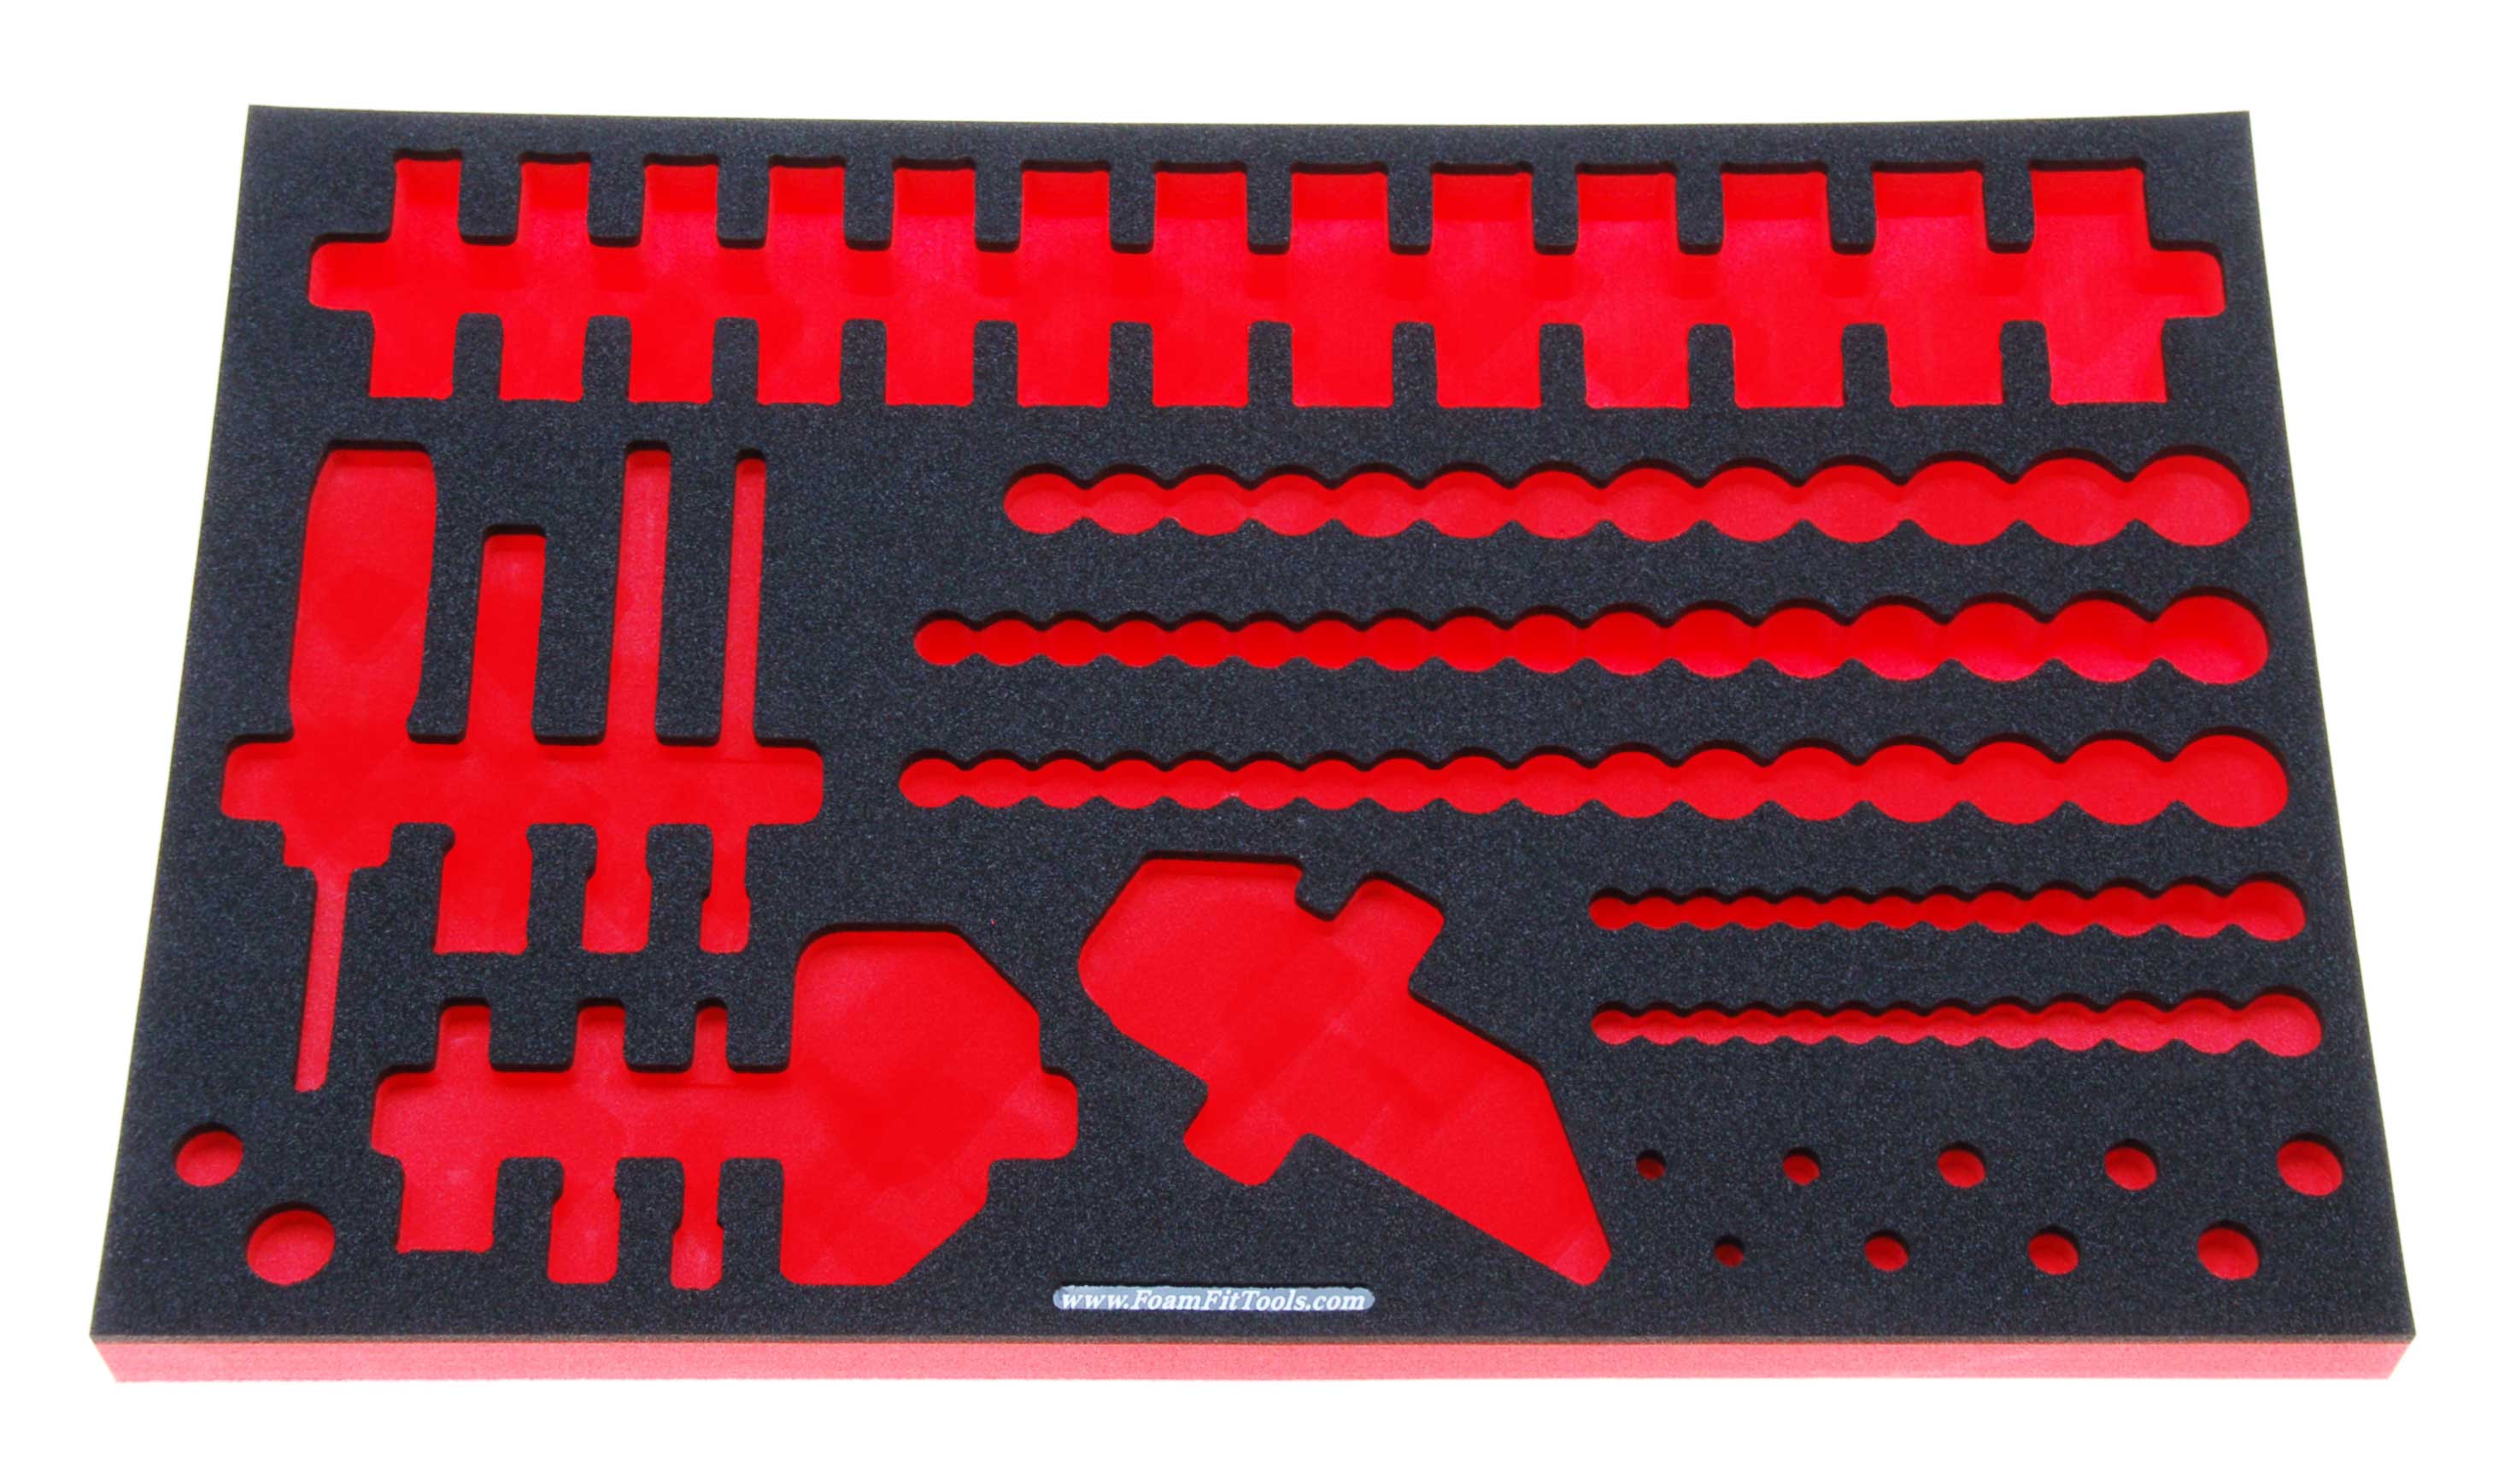 Foam Organizer for 86 Sockets with 7 Drive Tools and 33 Accessories.